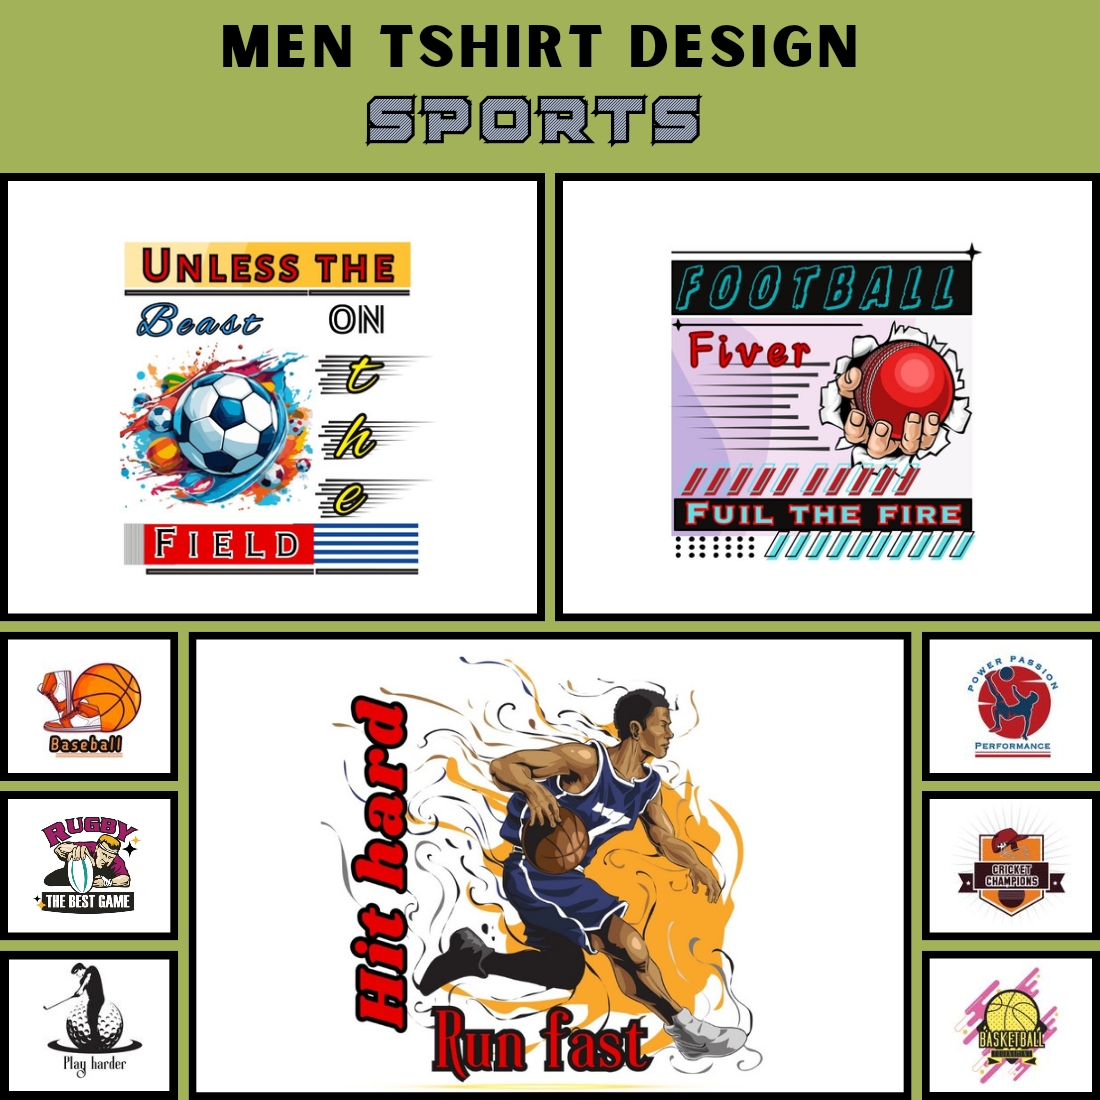 25 sports tshirt design in PNG file cover image.